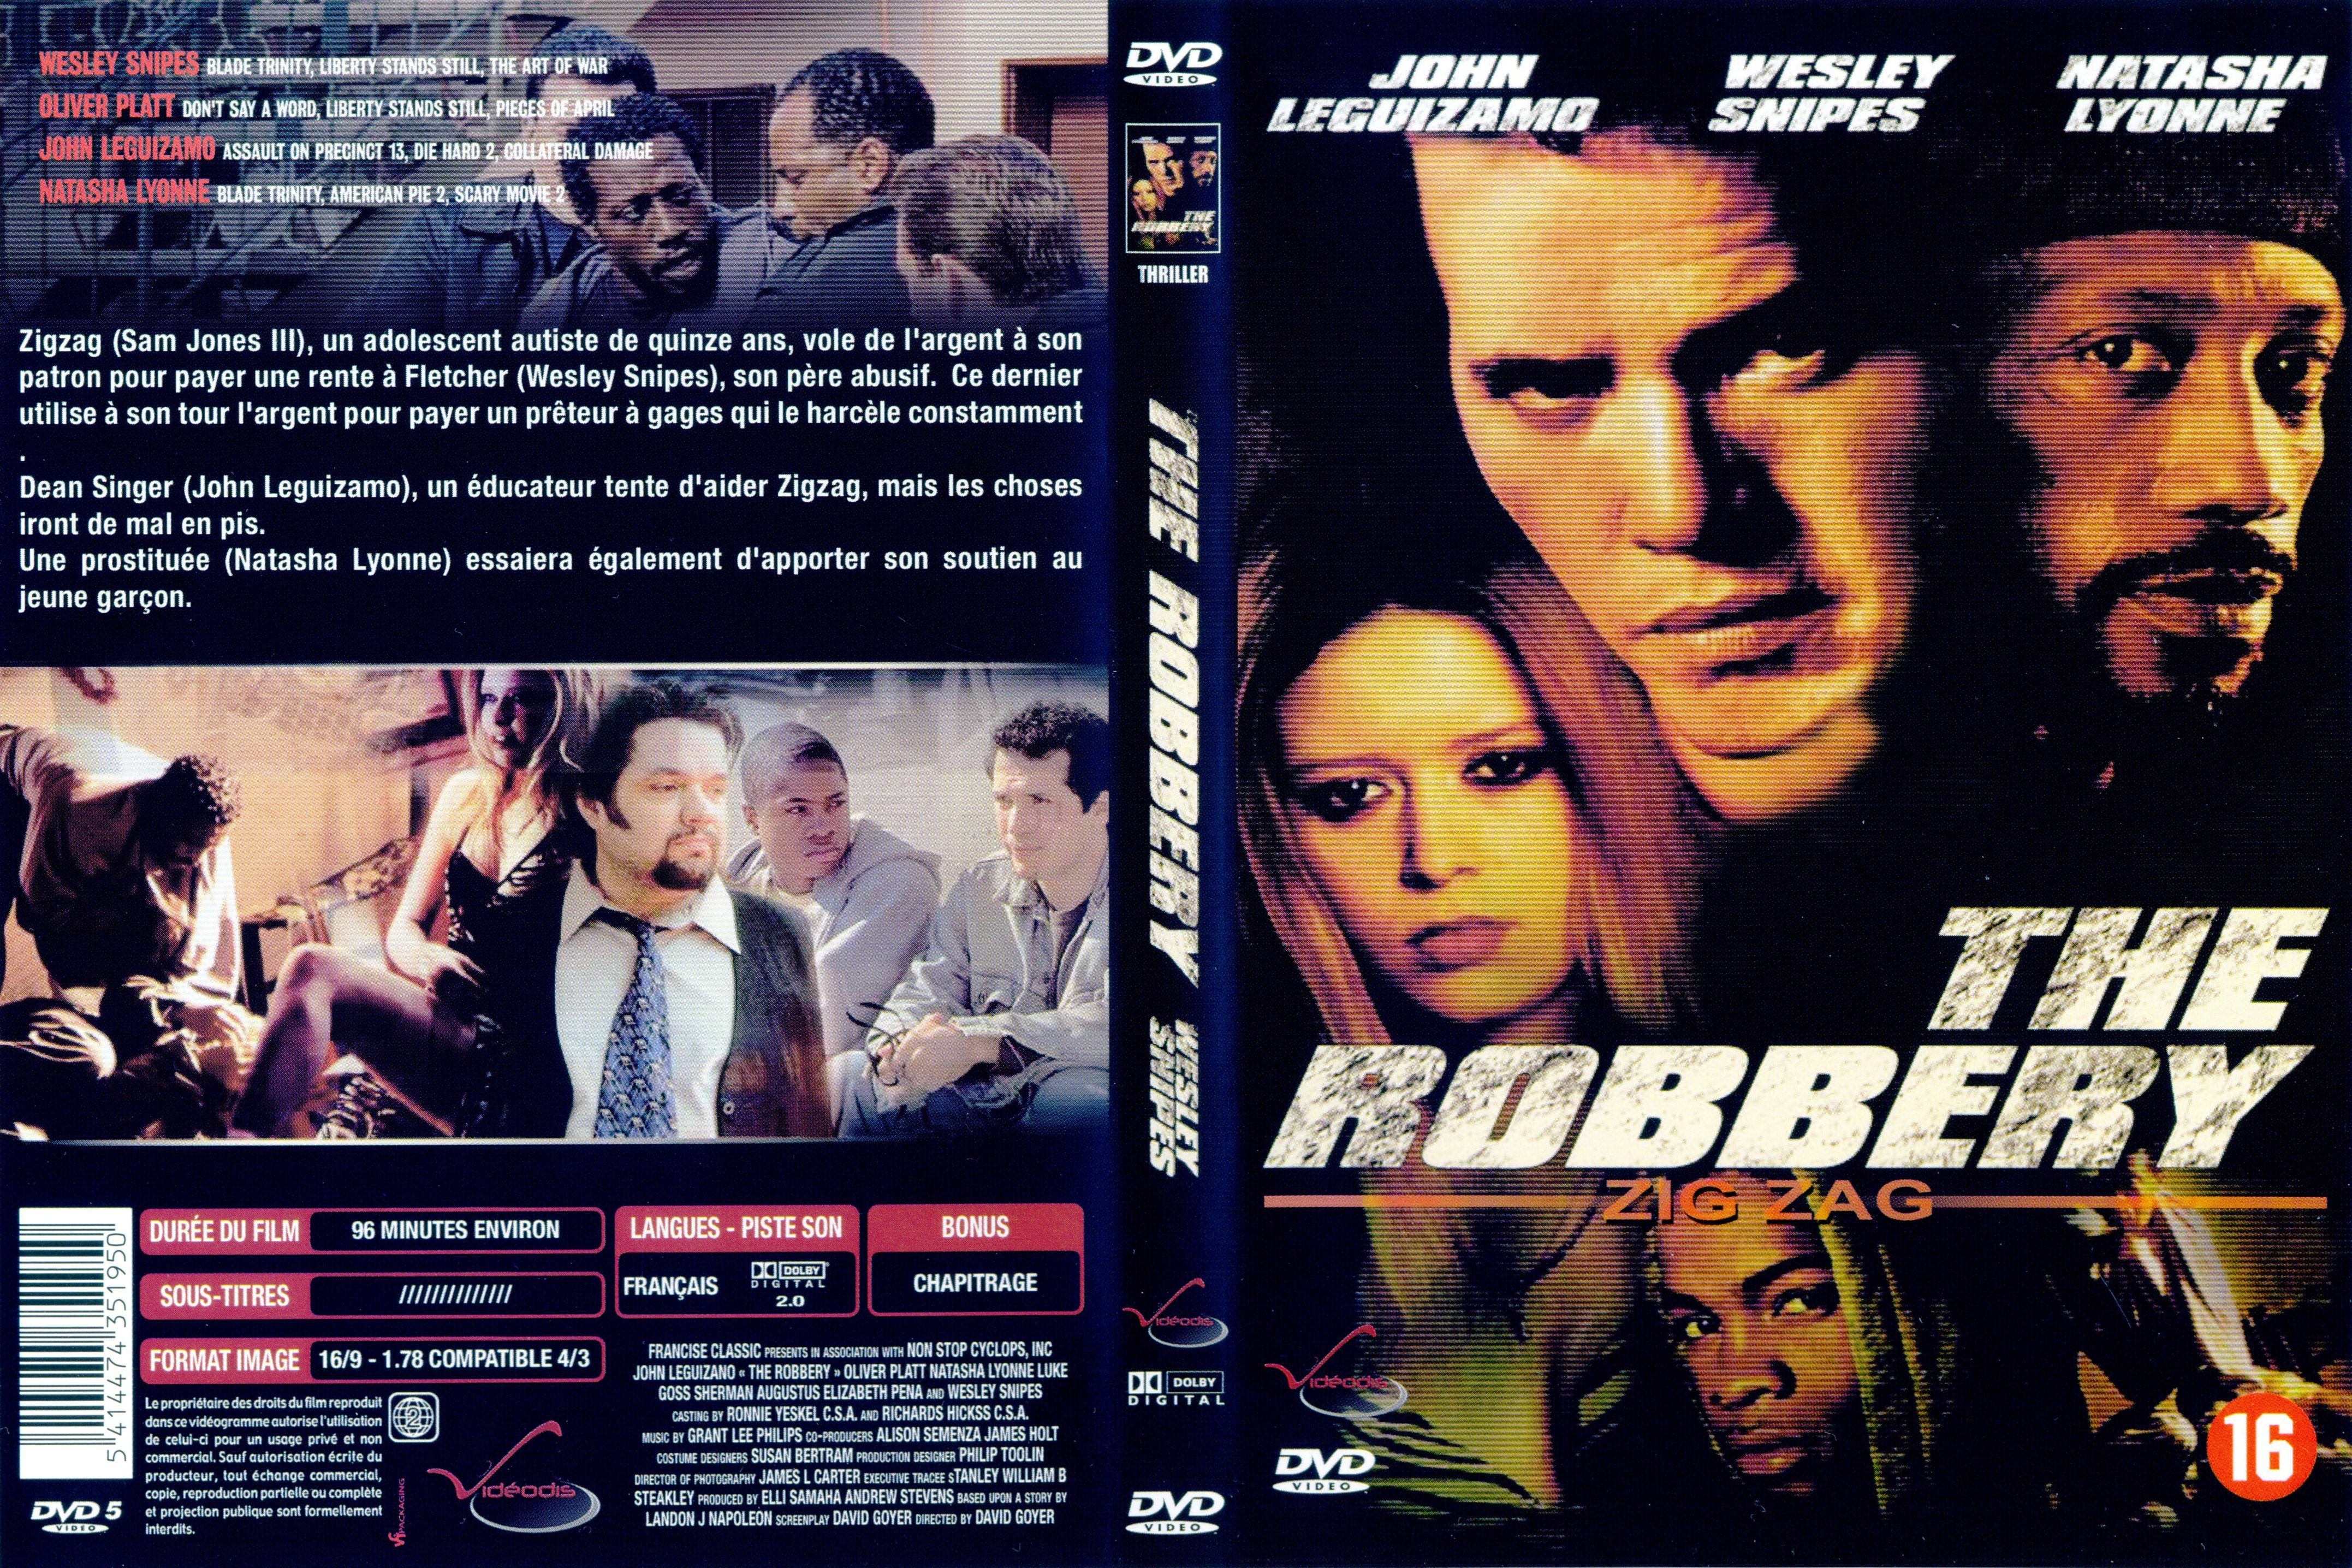 Jaquette DVD The robbery